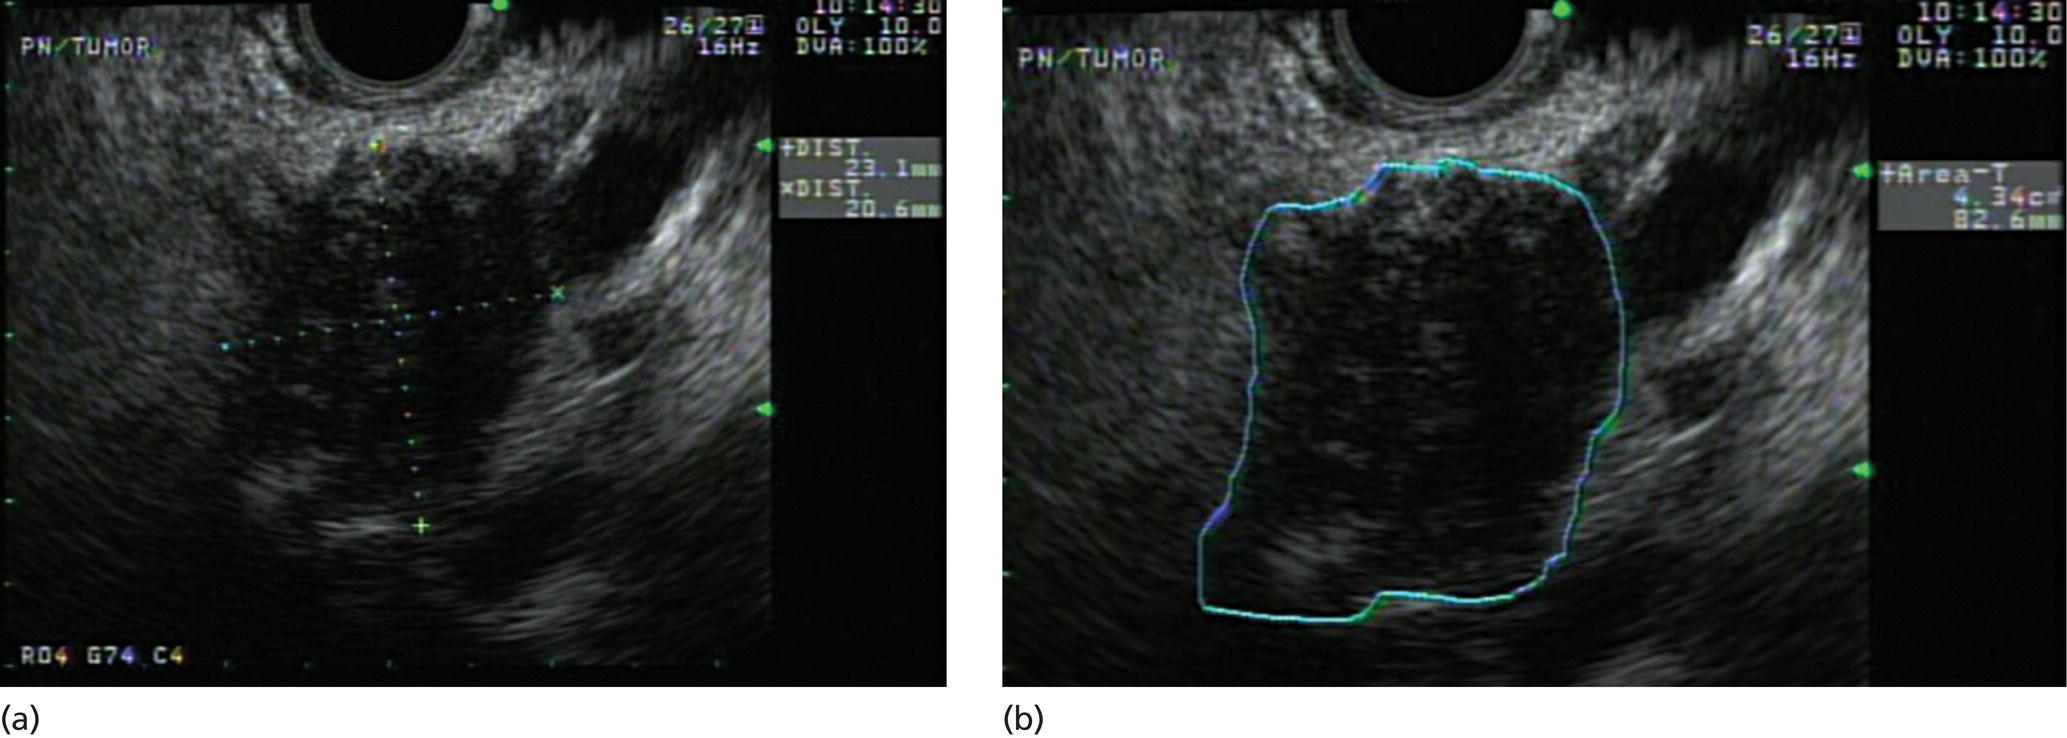 Photos depict initial assessment of tumor size by endoscopic ultrasound (EUS) imaging.